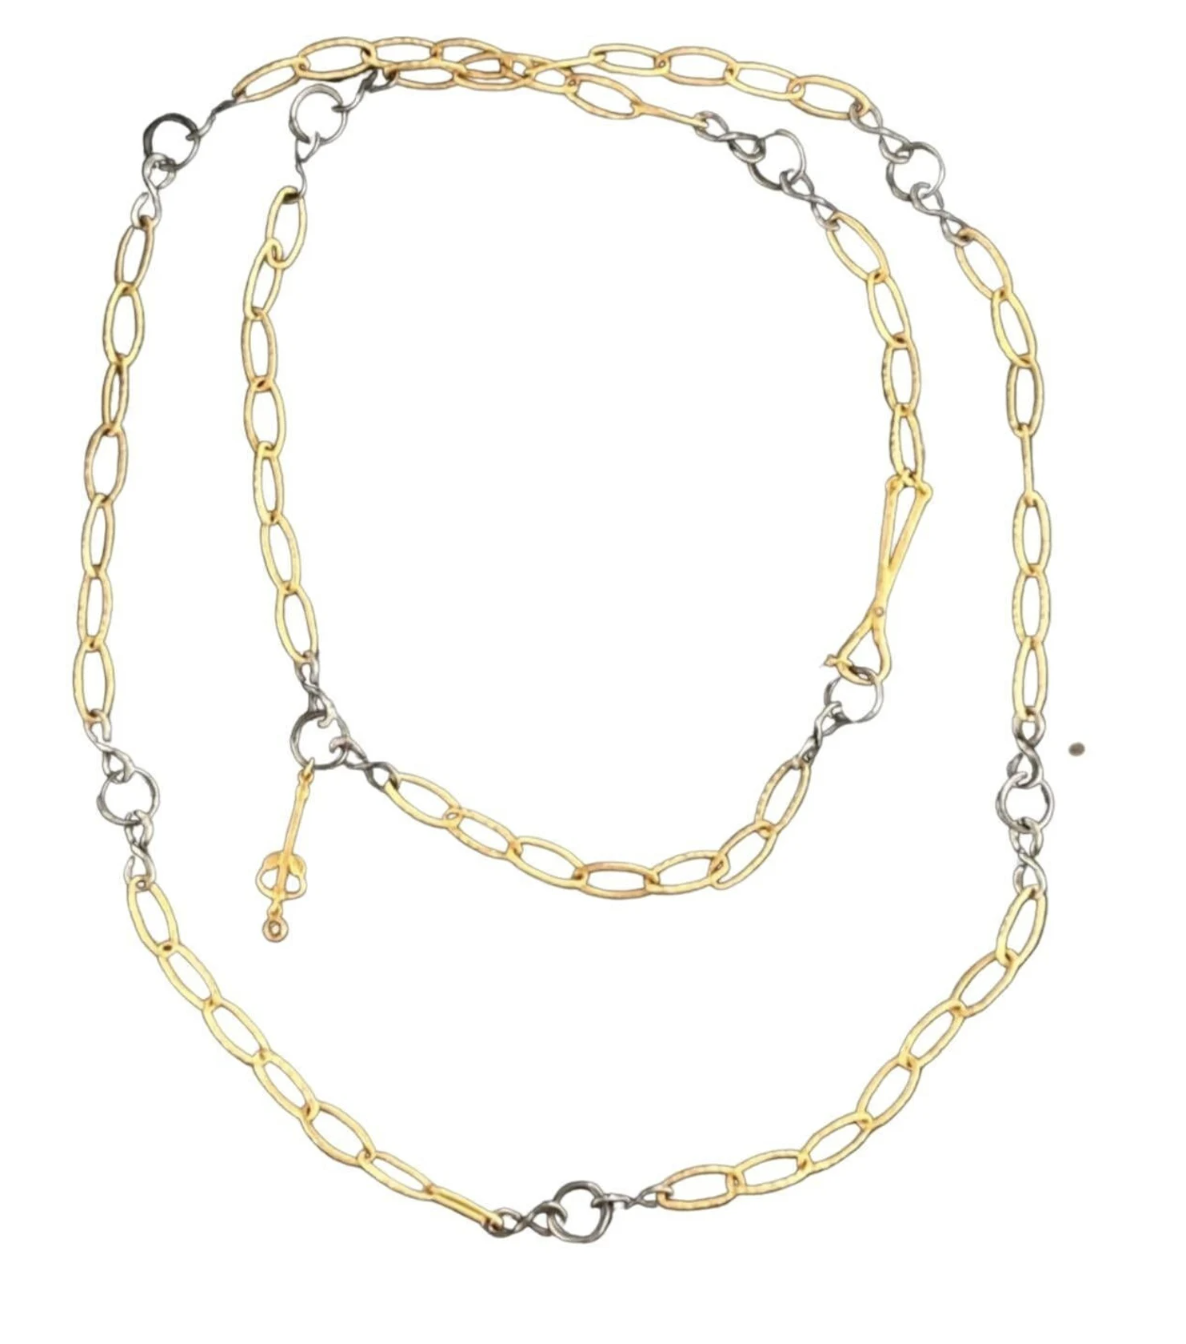 Handmade Open Link Gold Chain Necklace